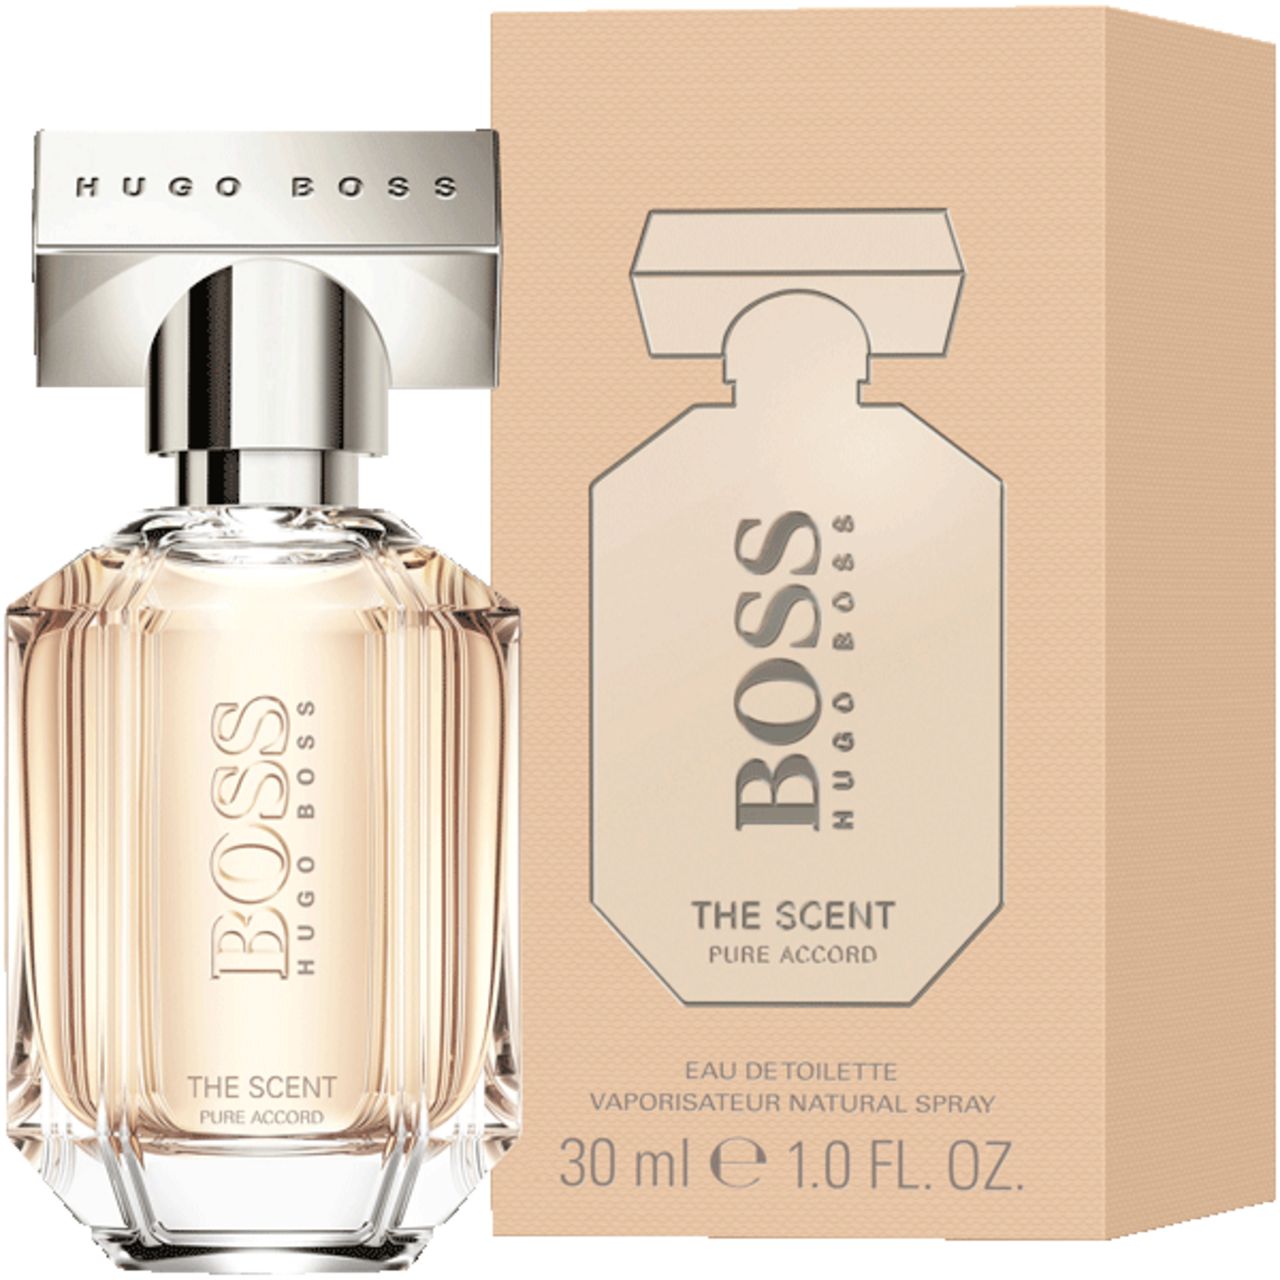 Boss - Hugo Boss, The Scent For Her Pure Accord E.d.T. Nat. Spray